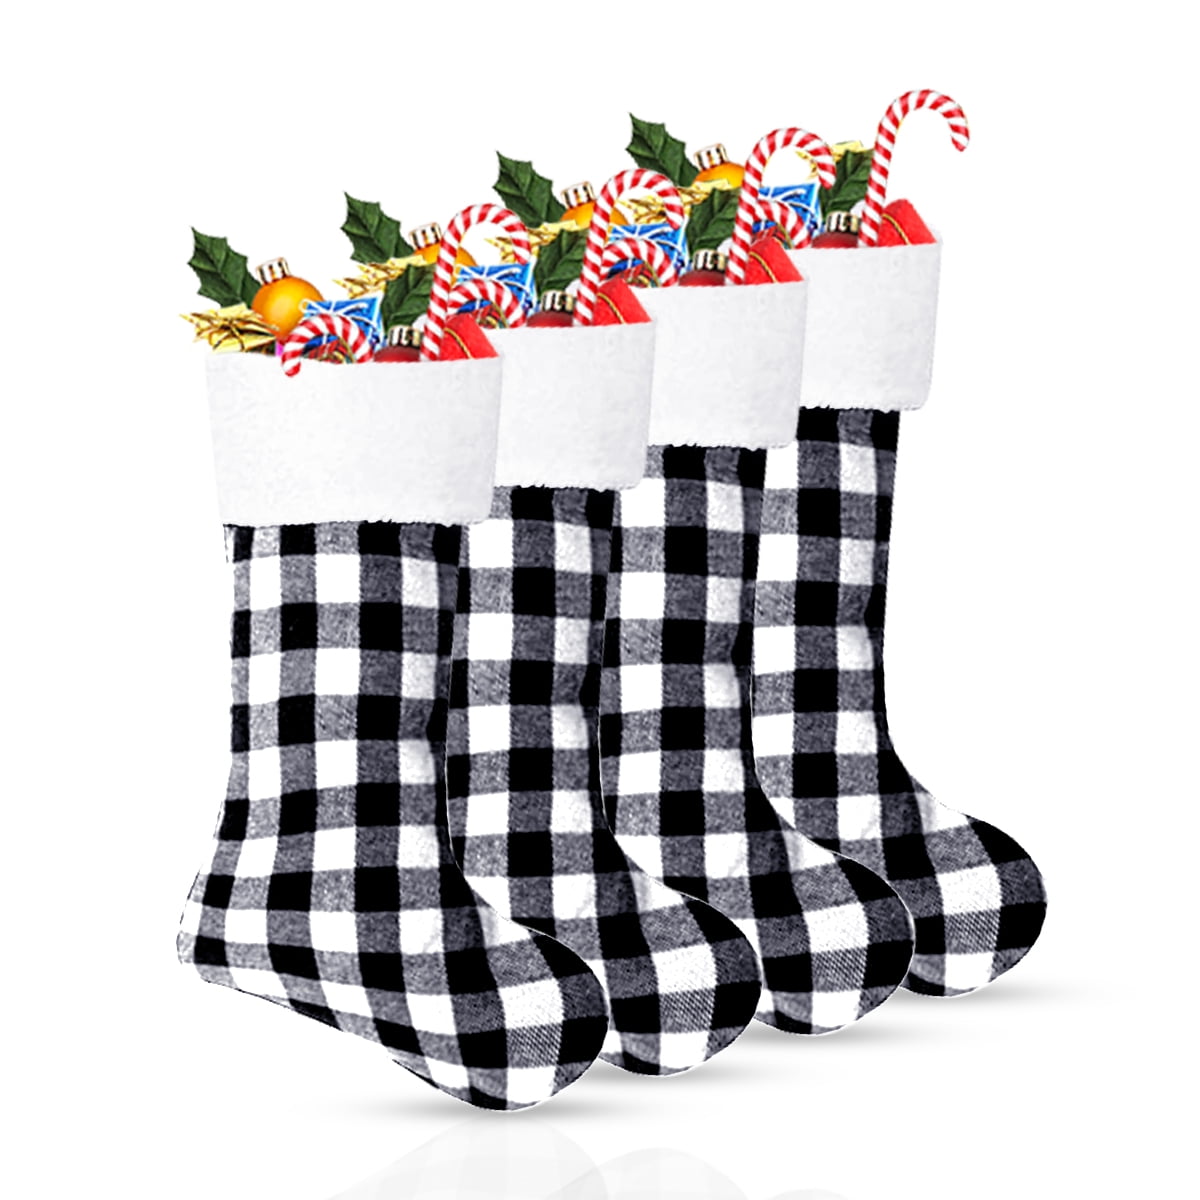  EDLDECCO 20 Inches Christmas Stocking Buffalo Check with  Knitted Cuff Black and White Plaid Home Xmas Tree Mantel Holiday Decoration  Ornaments : Home & Kitchen